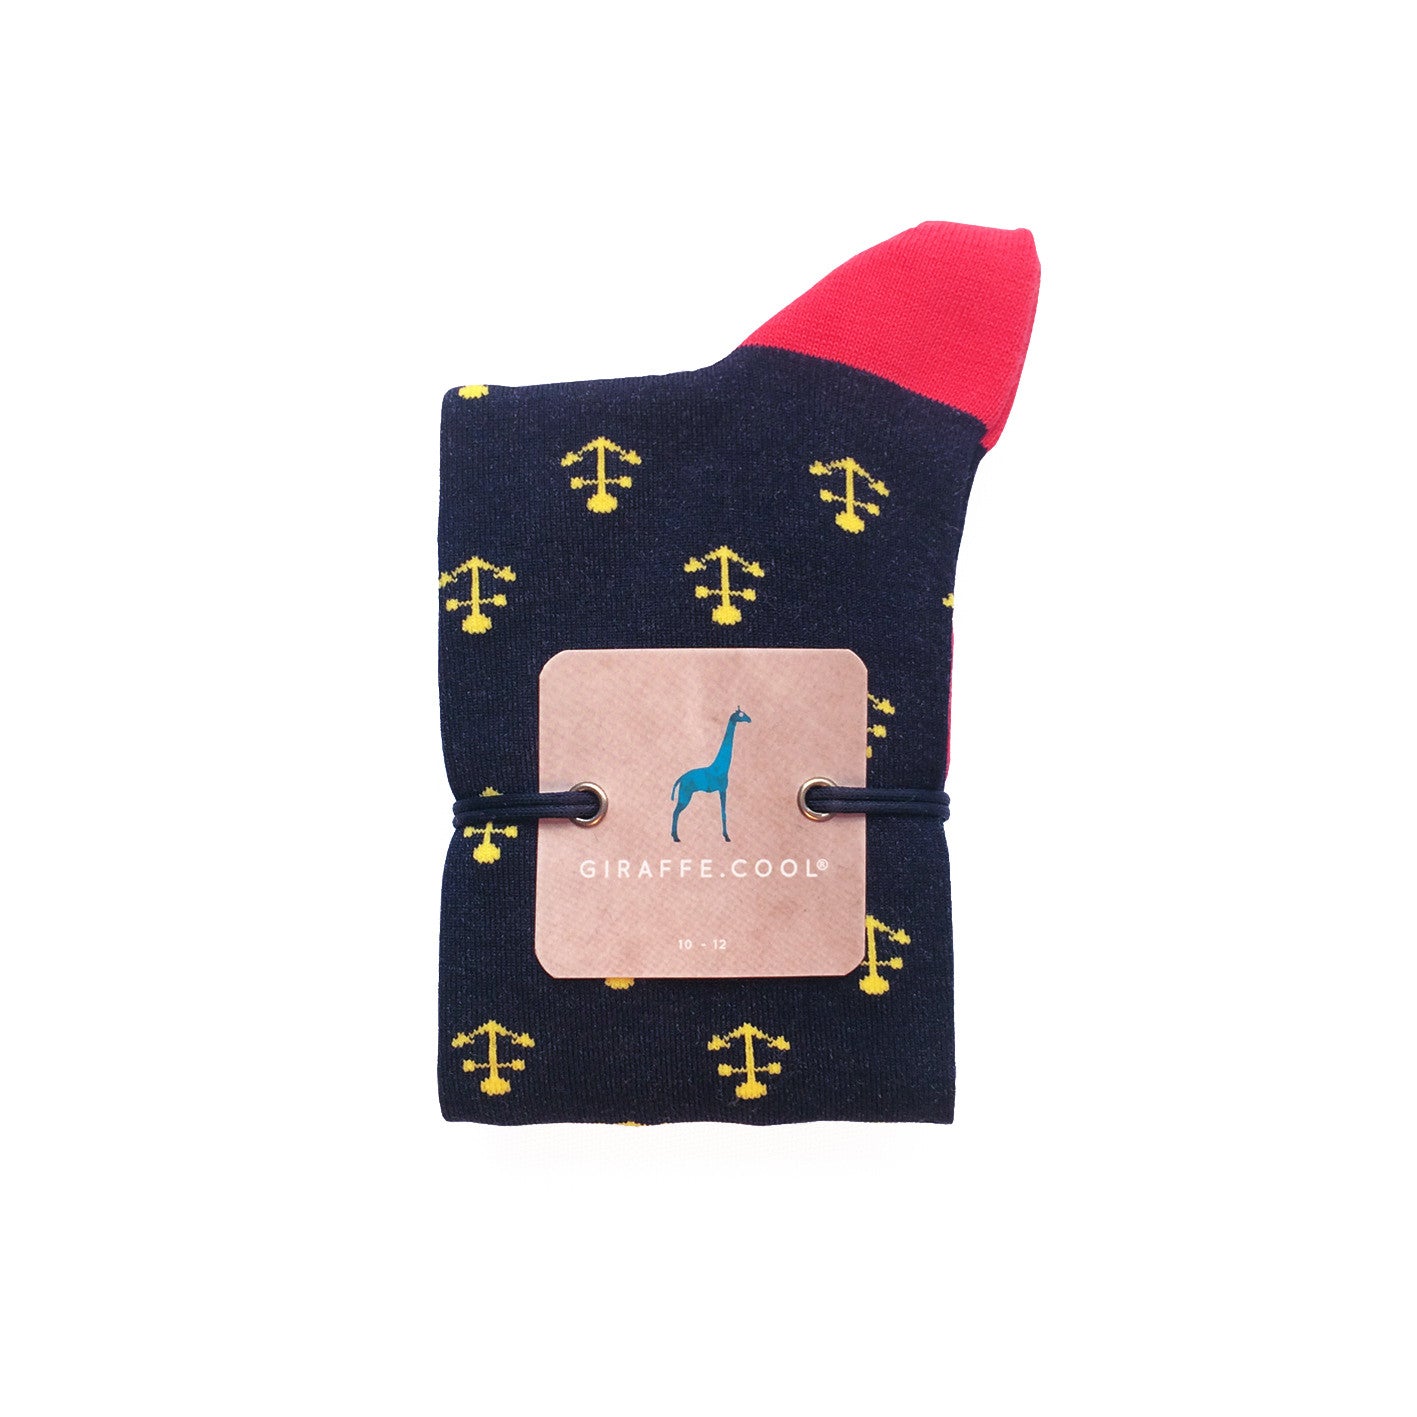 Giraffe Cool | Dark Blue Red And Yellow Anchors Mercerized And Brushed Cotton Socks Closed